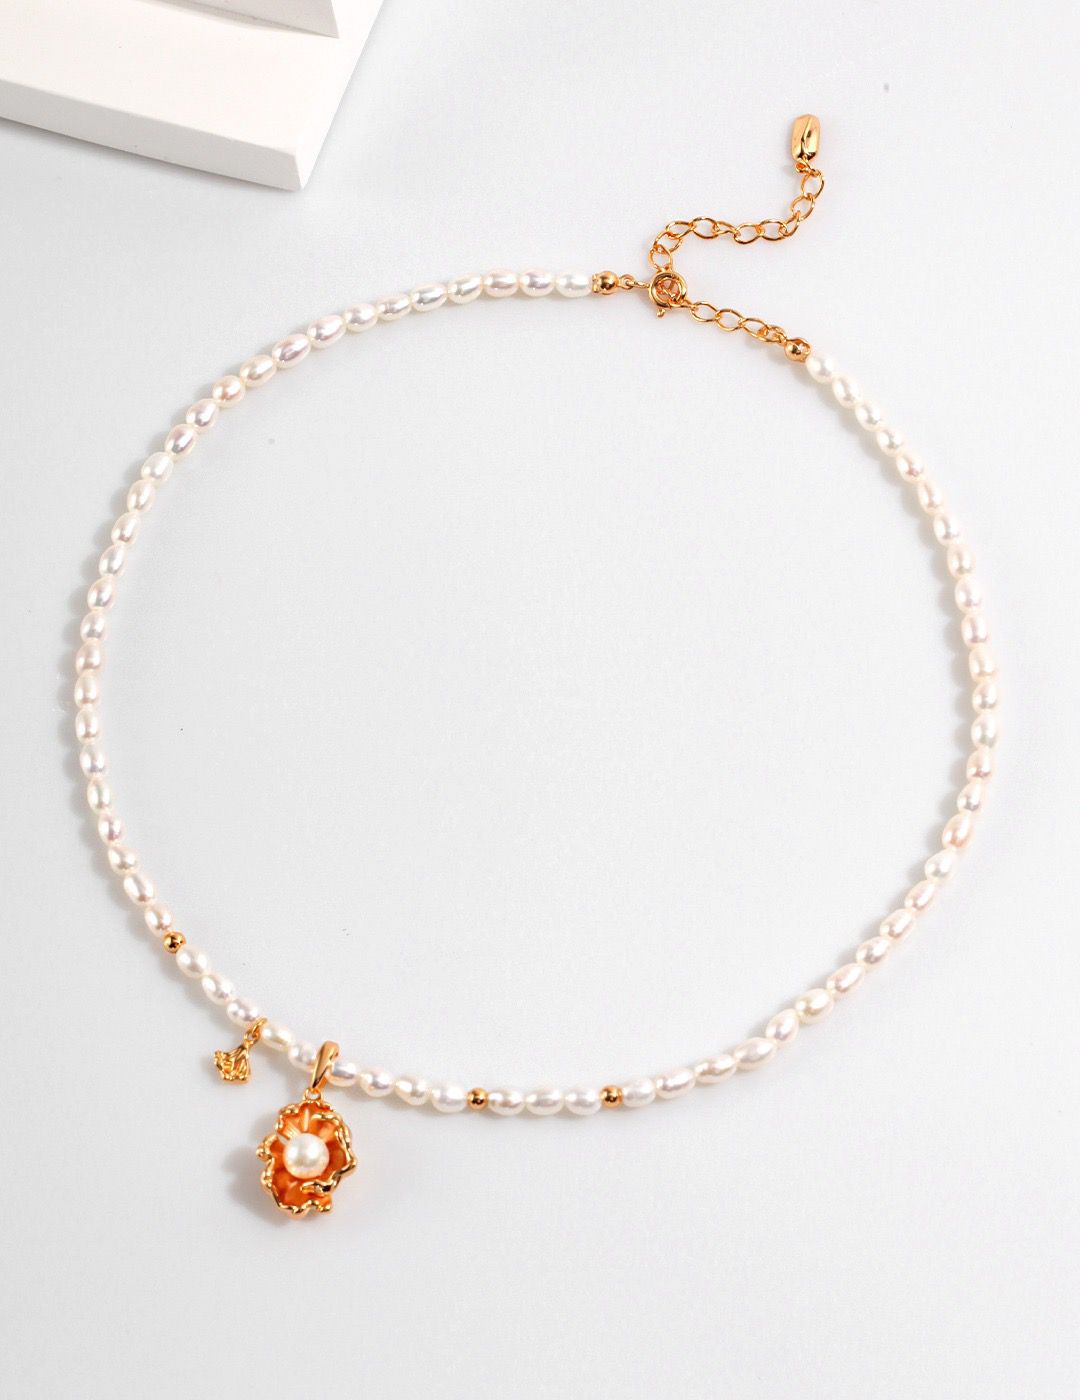 Delicate chain necklace with natural seashells and freshwater pearls